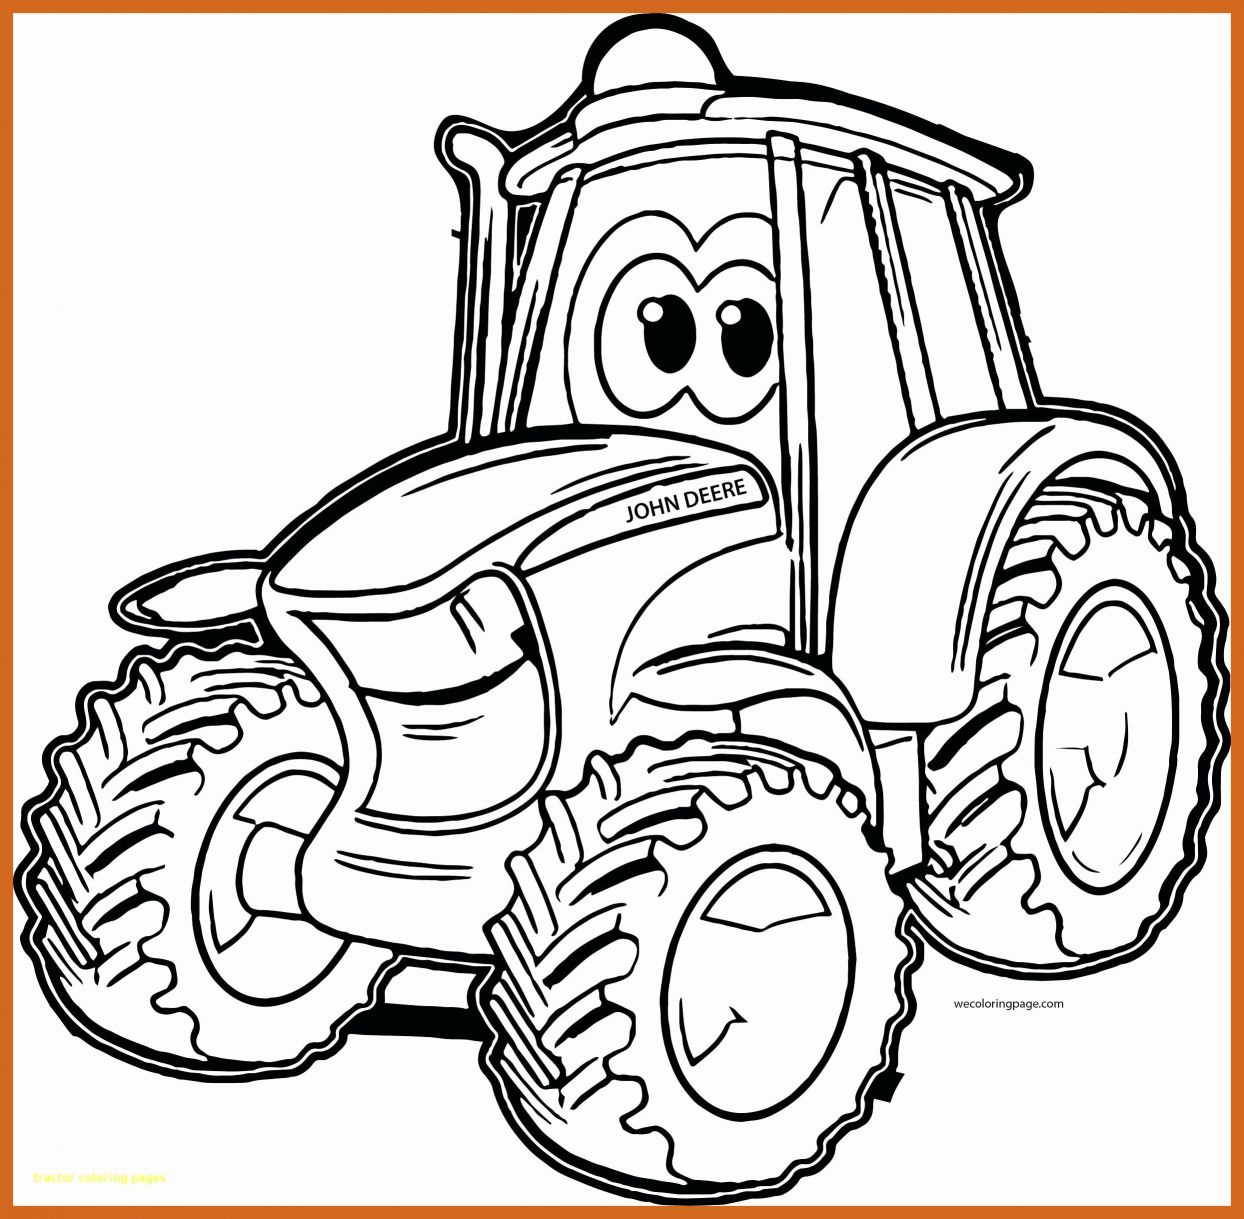 john deere coloring pages at getdrawings  free for